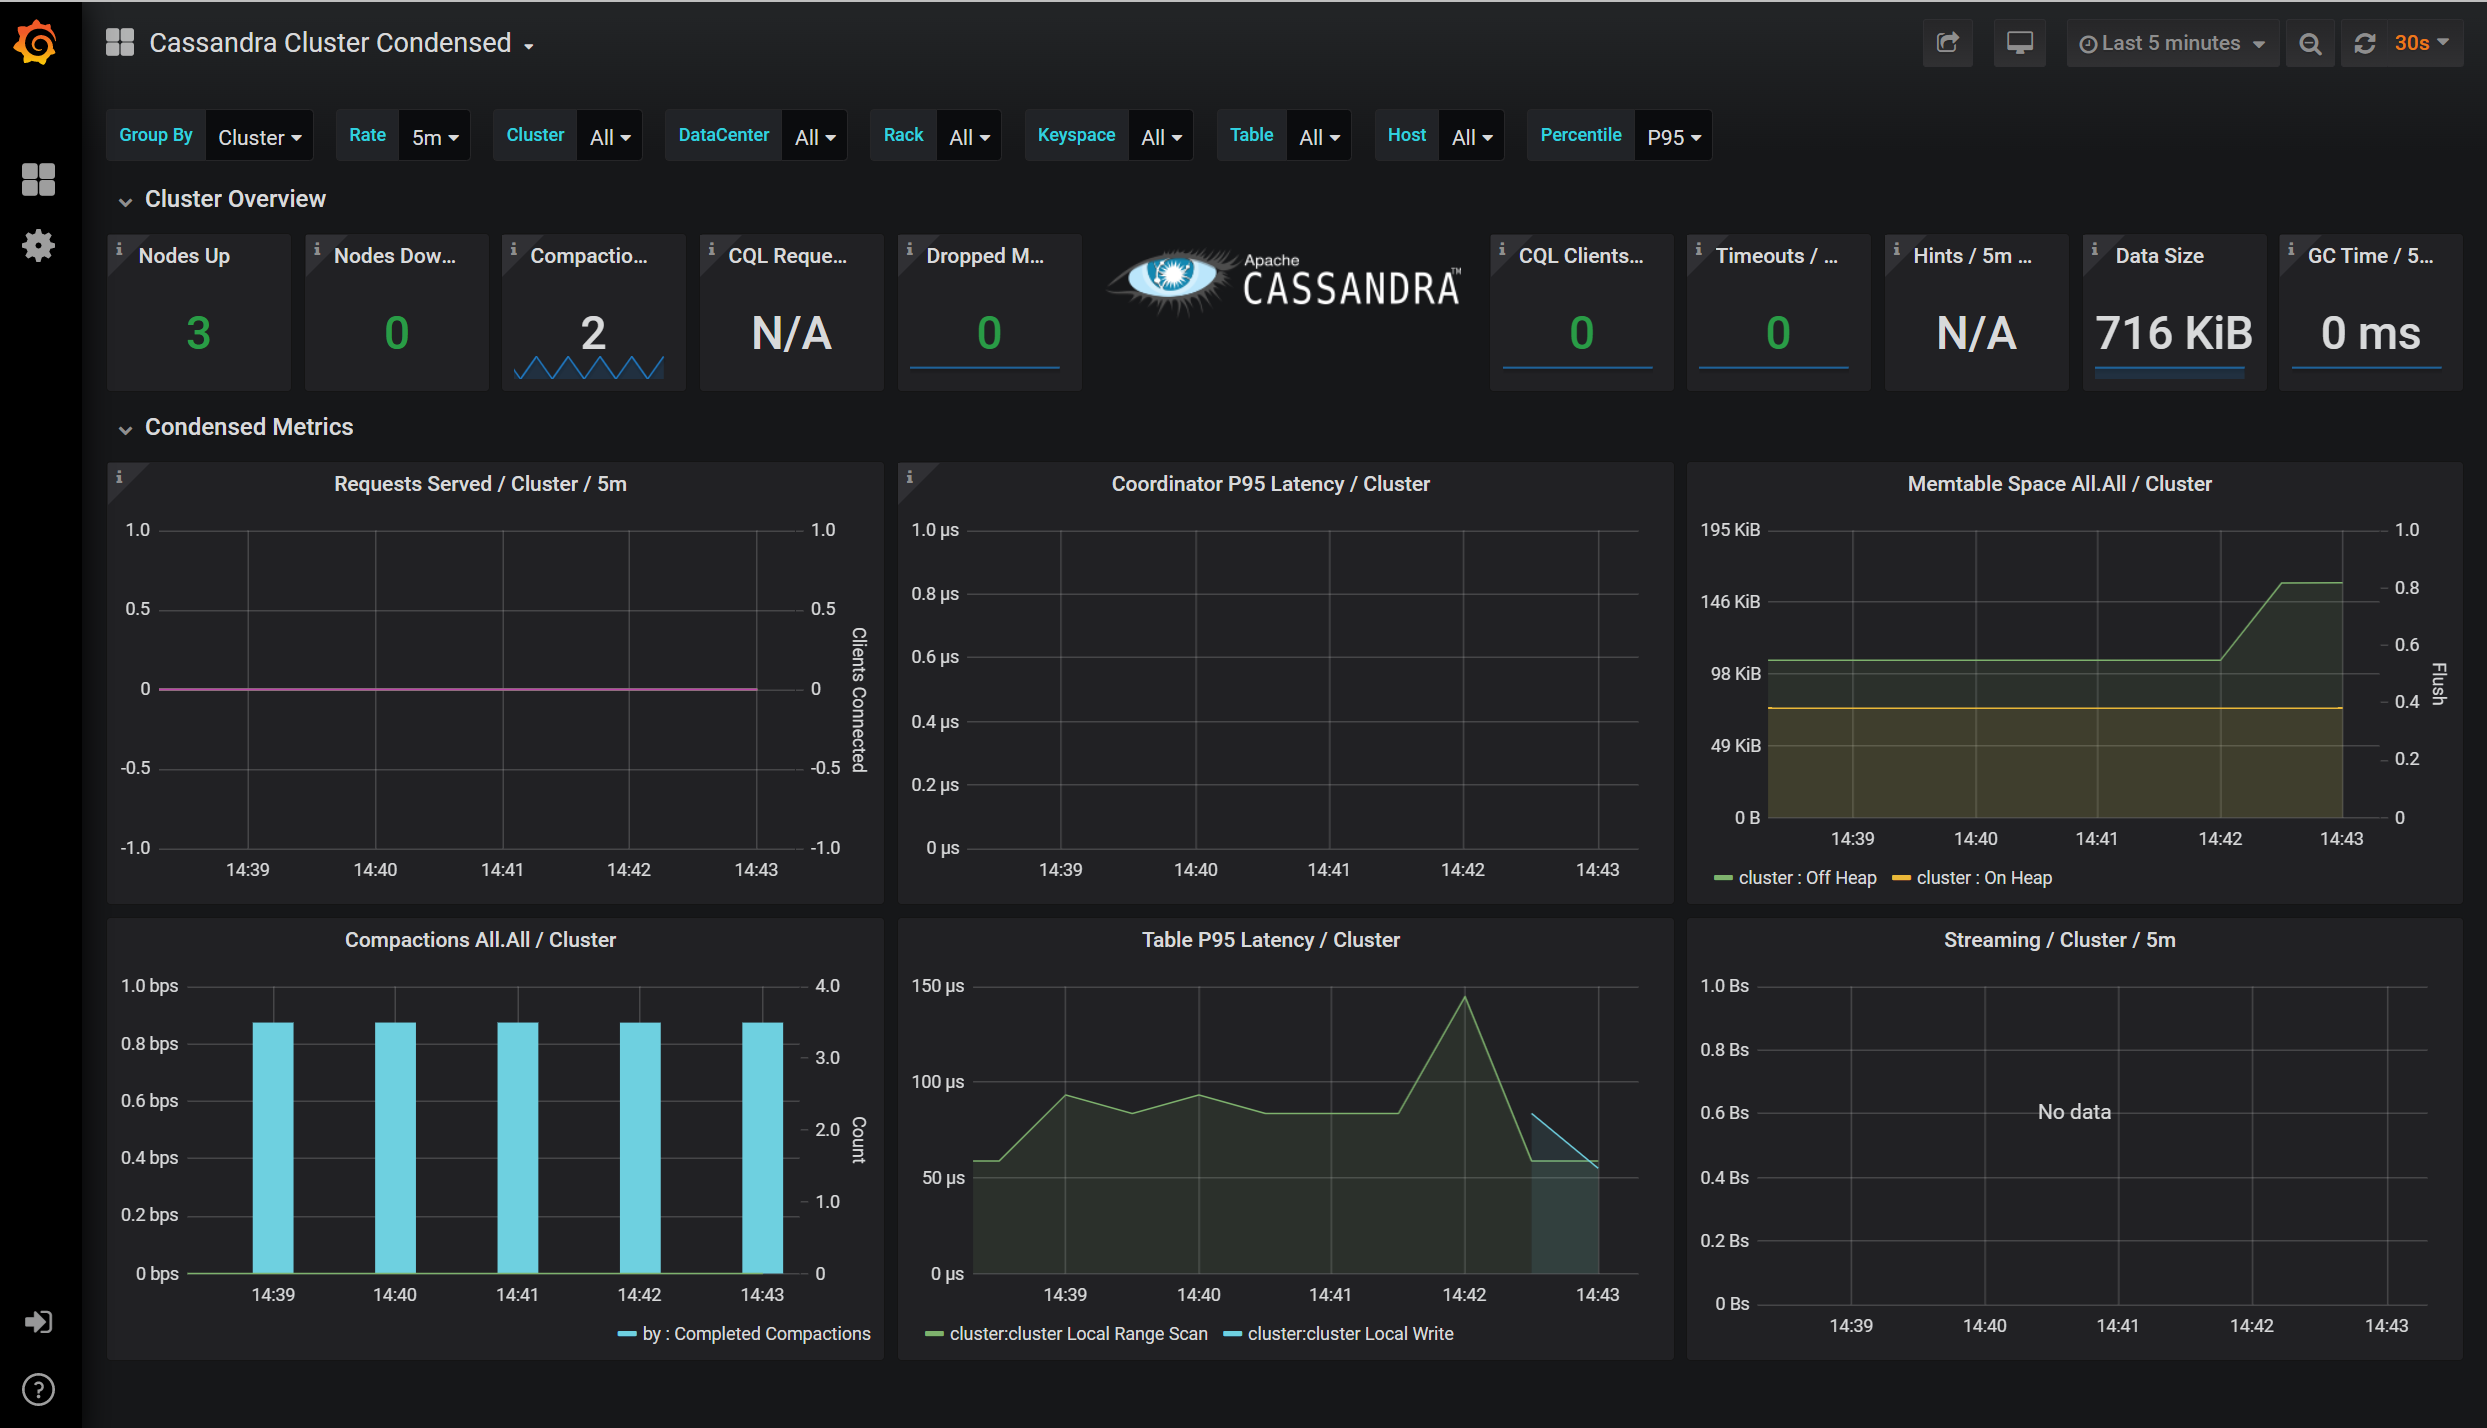 View the Cassandra managed instance metrics in the dashboard.